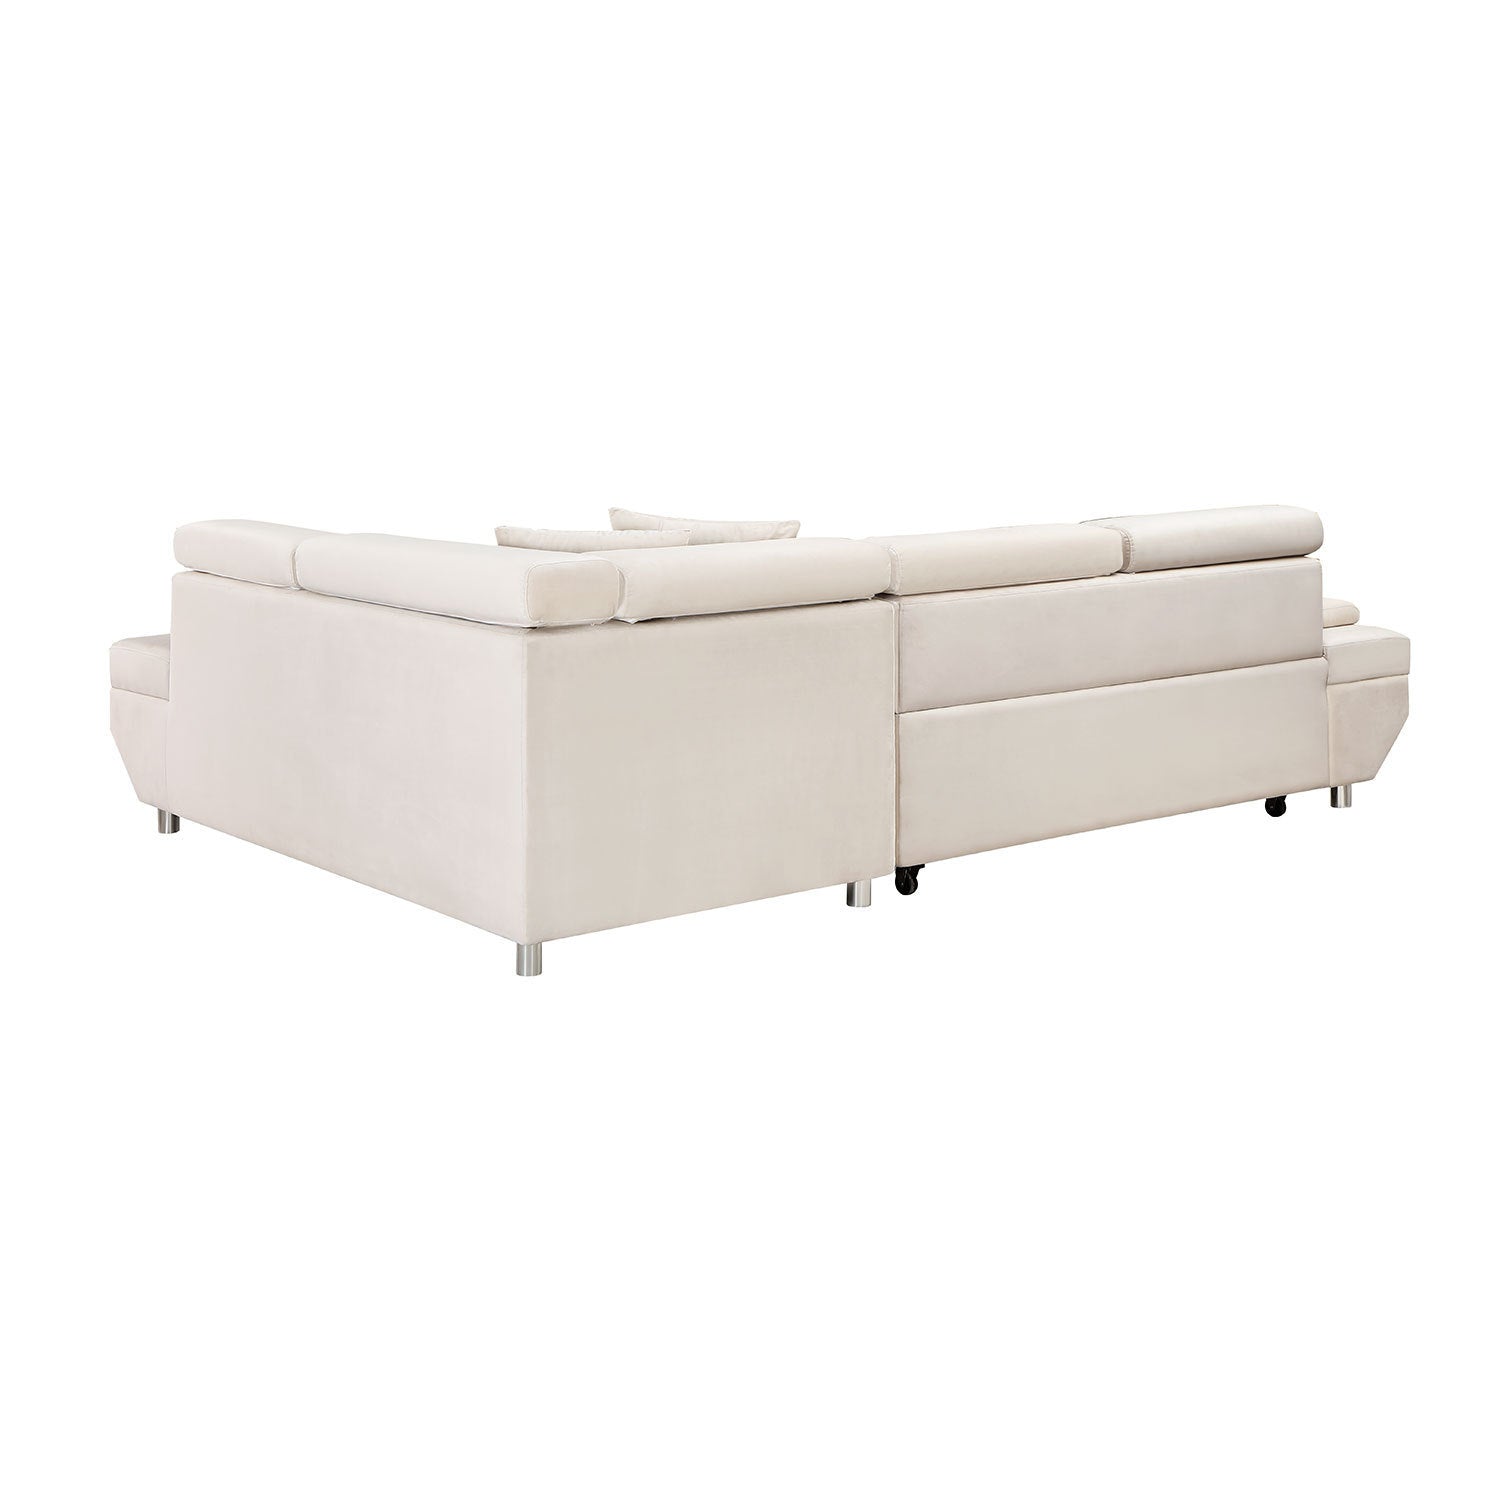 L Shape Sofa, Sleeper Sofa 2 in 1 Pull Out Couch Bed, Right-Facing Pull-out Bed Metal Legs - Velvet Beige